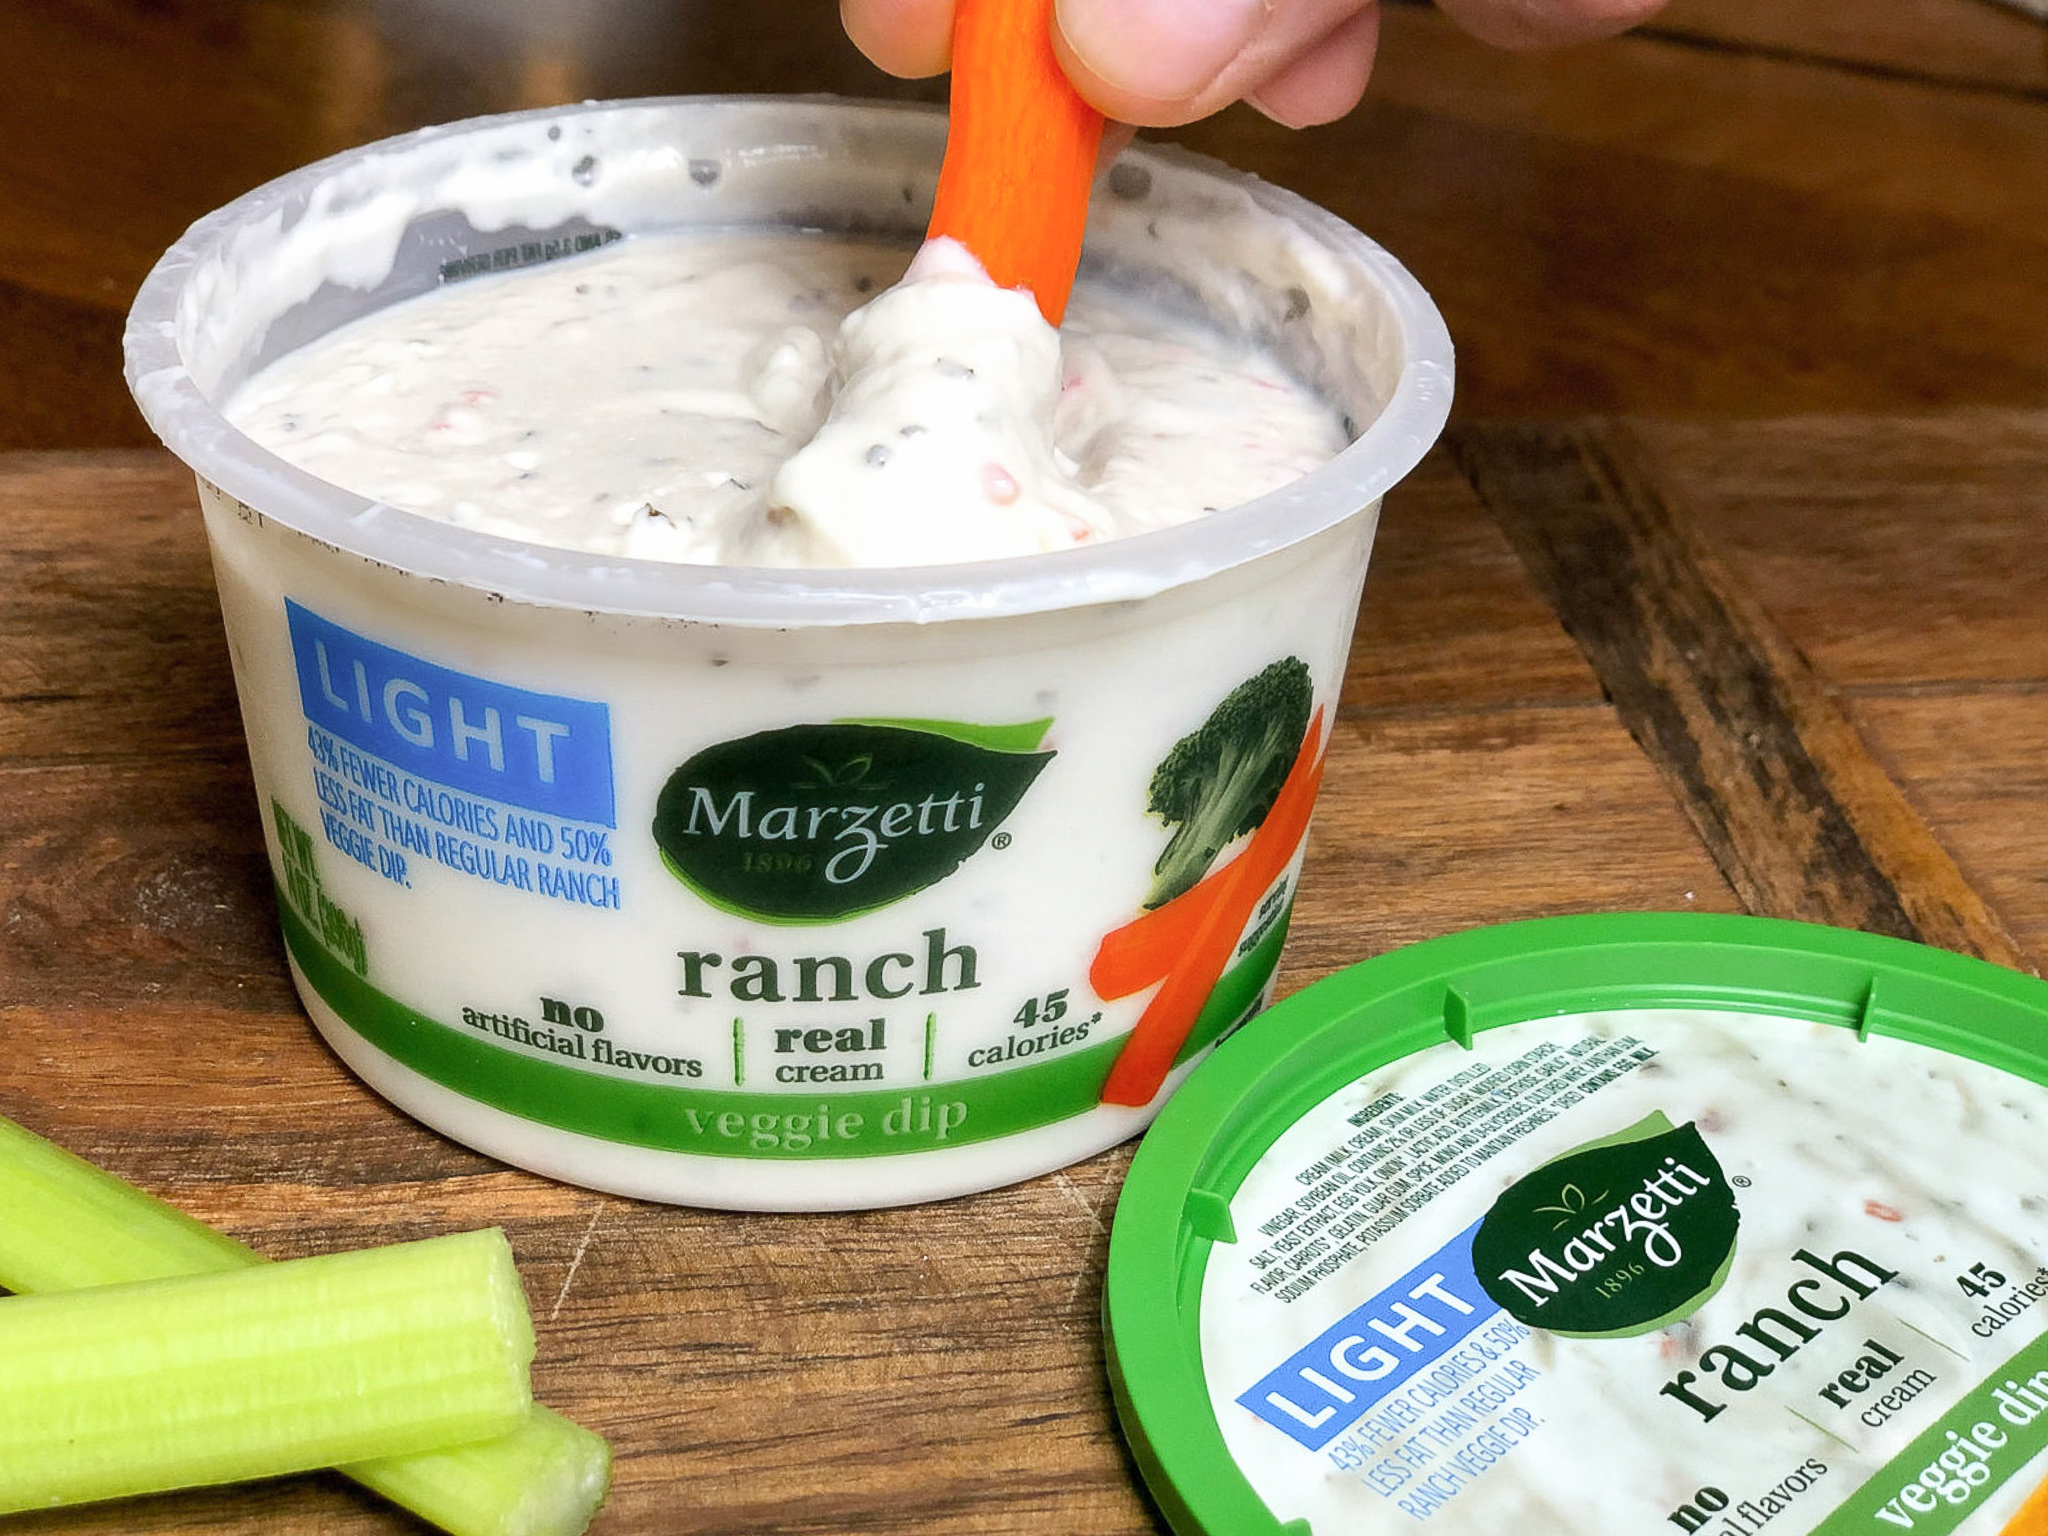 Get Marzetti Dip For As Low As $1.79 At Kroger (Plus Cheap Dressing)